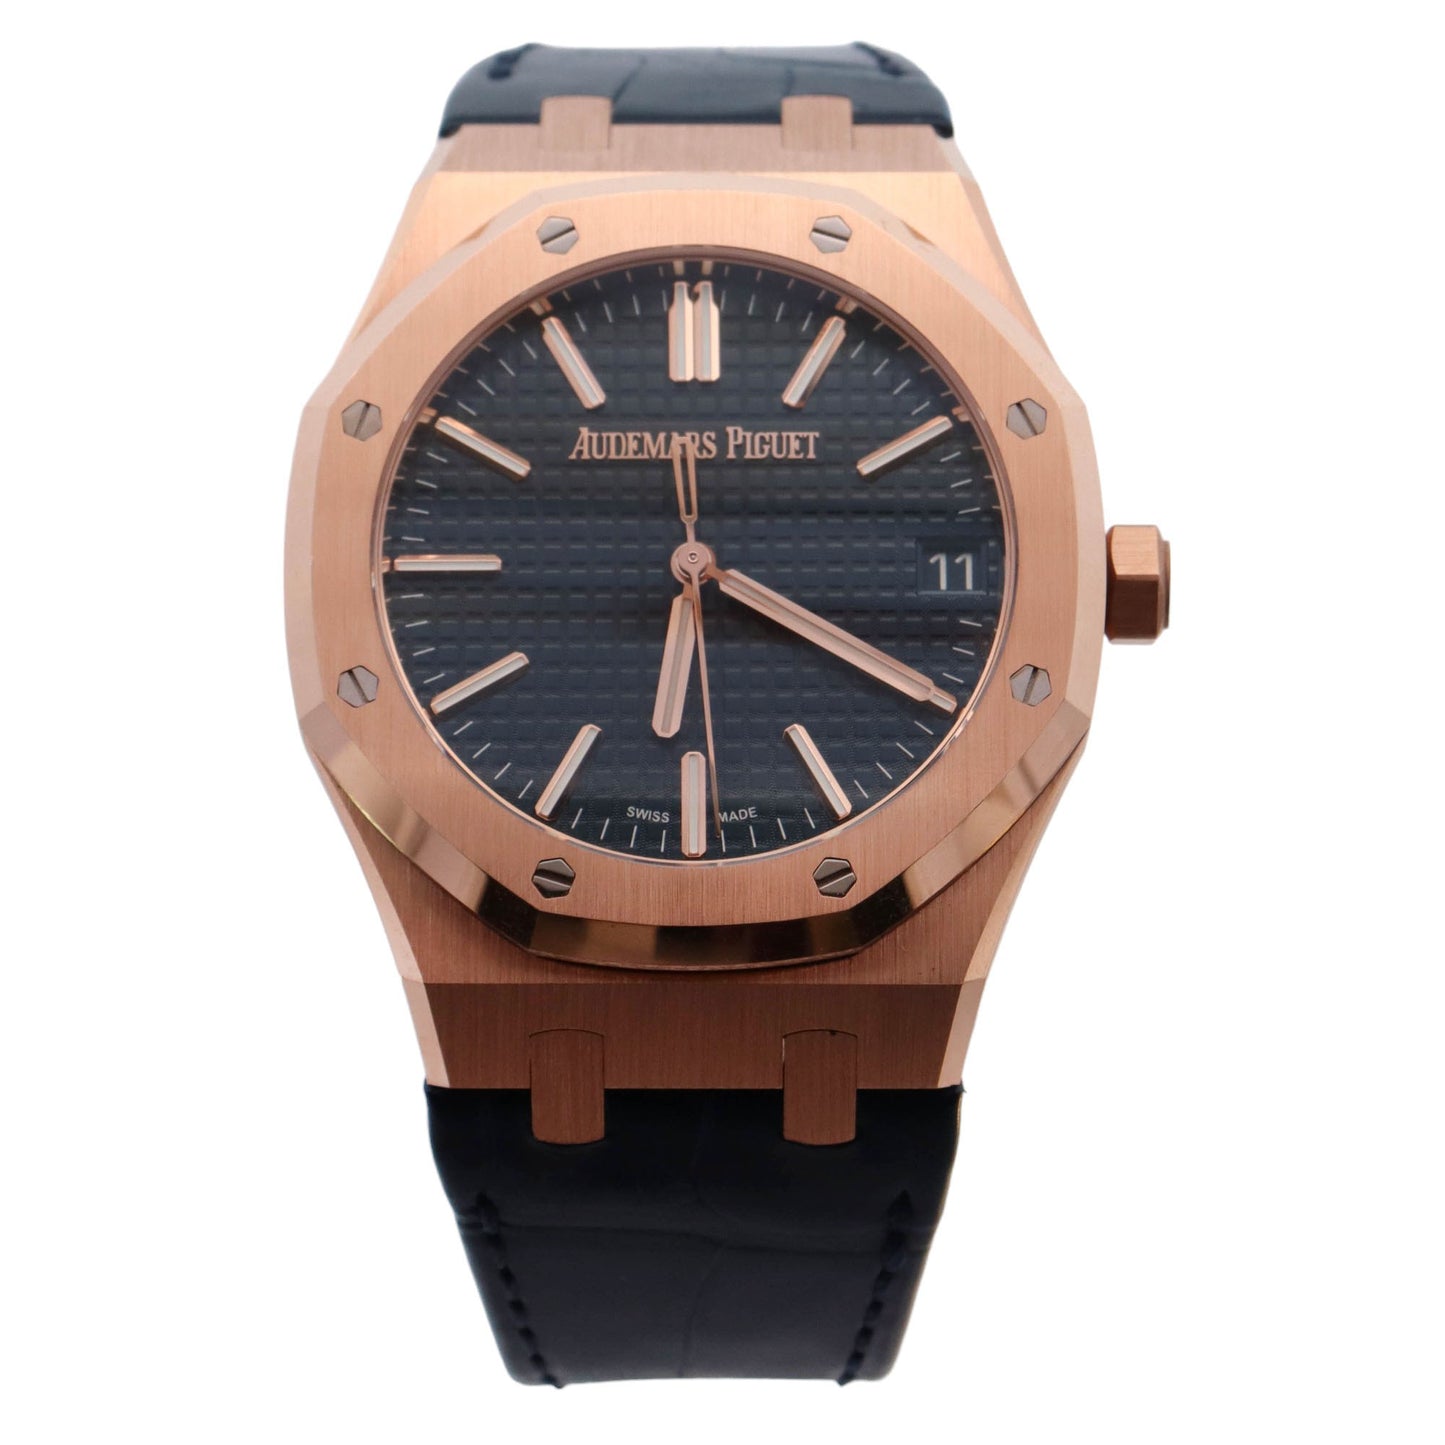 Audemars Piguet Royal Oak Rose Gold 41mm Blue Stick Dial Watch Reference# 15510OR.OO.D315CR.02 - Happy Jewelers Fine Jewelry Lifetime Warranty